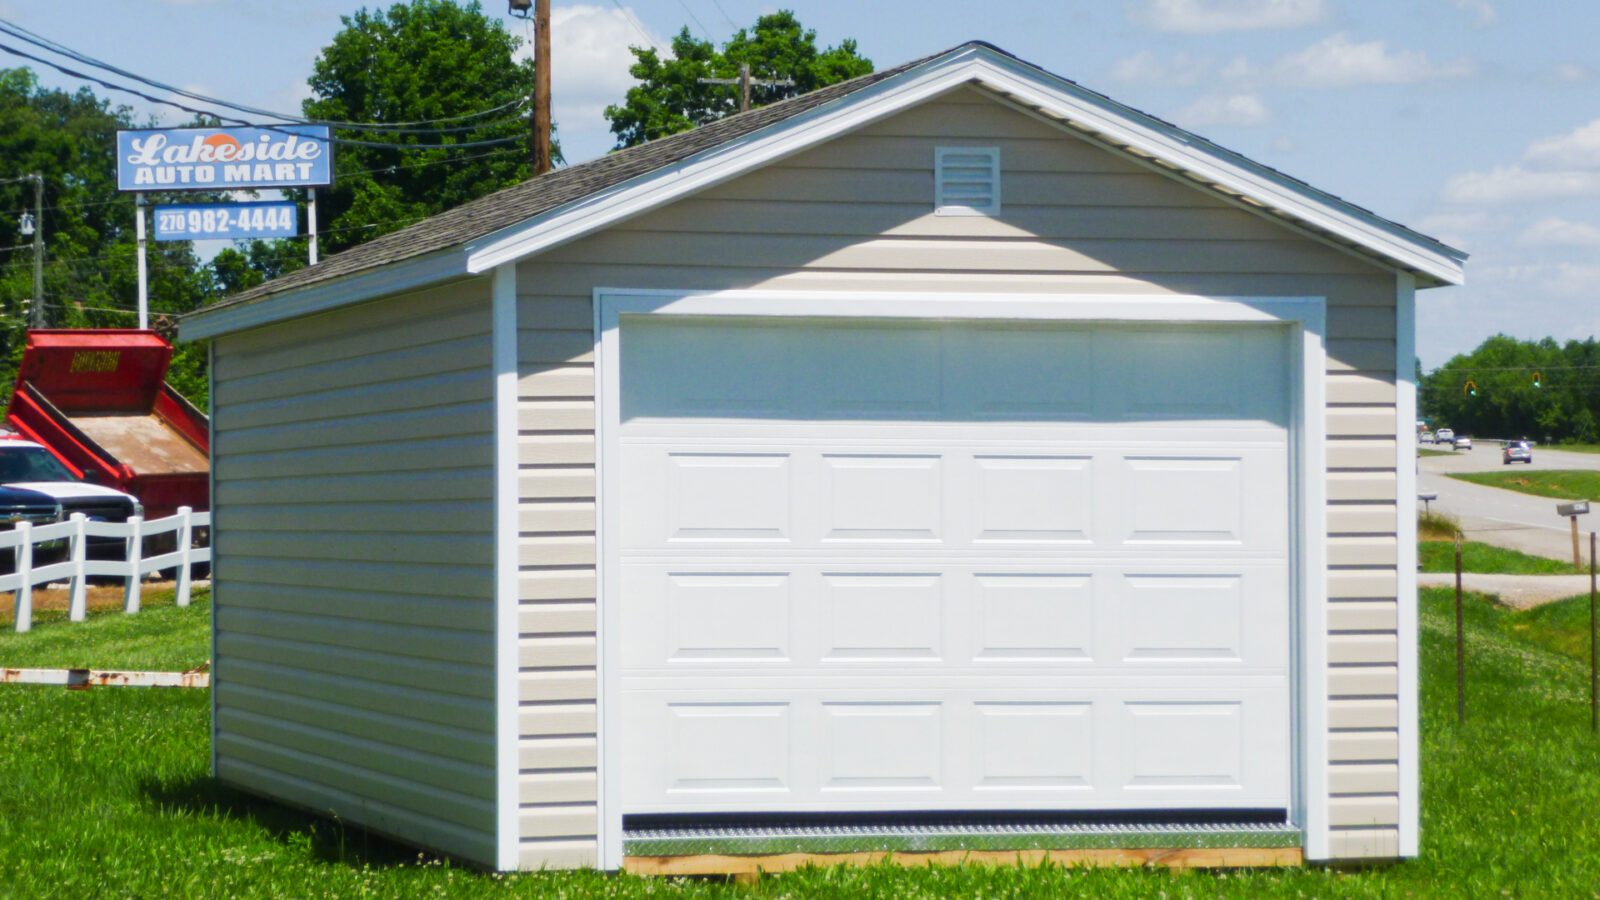 exterior of tan and white prefab detached garage for sale